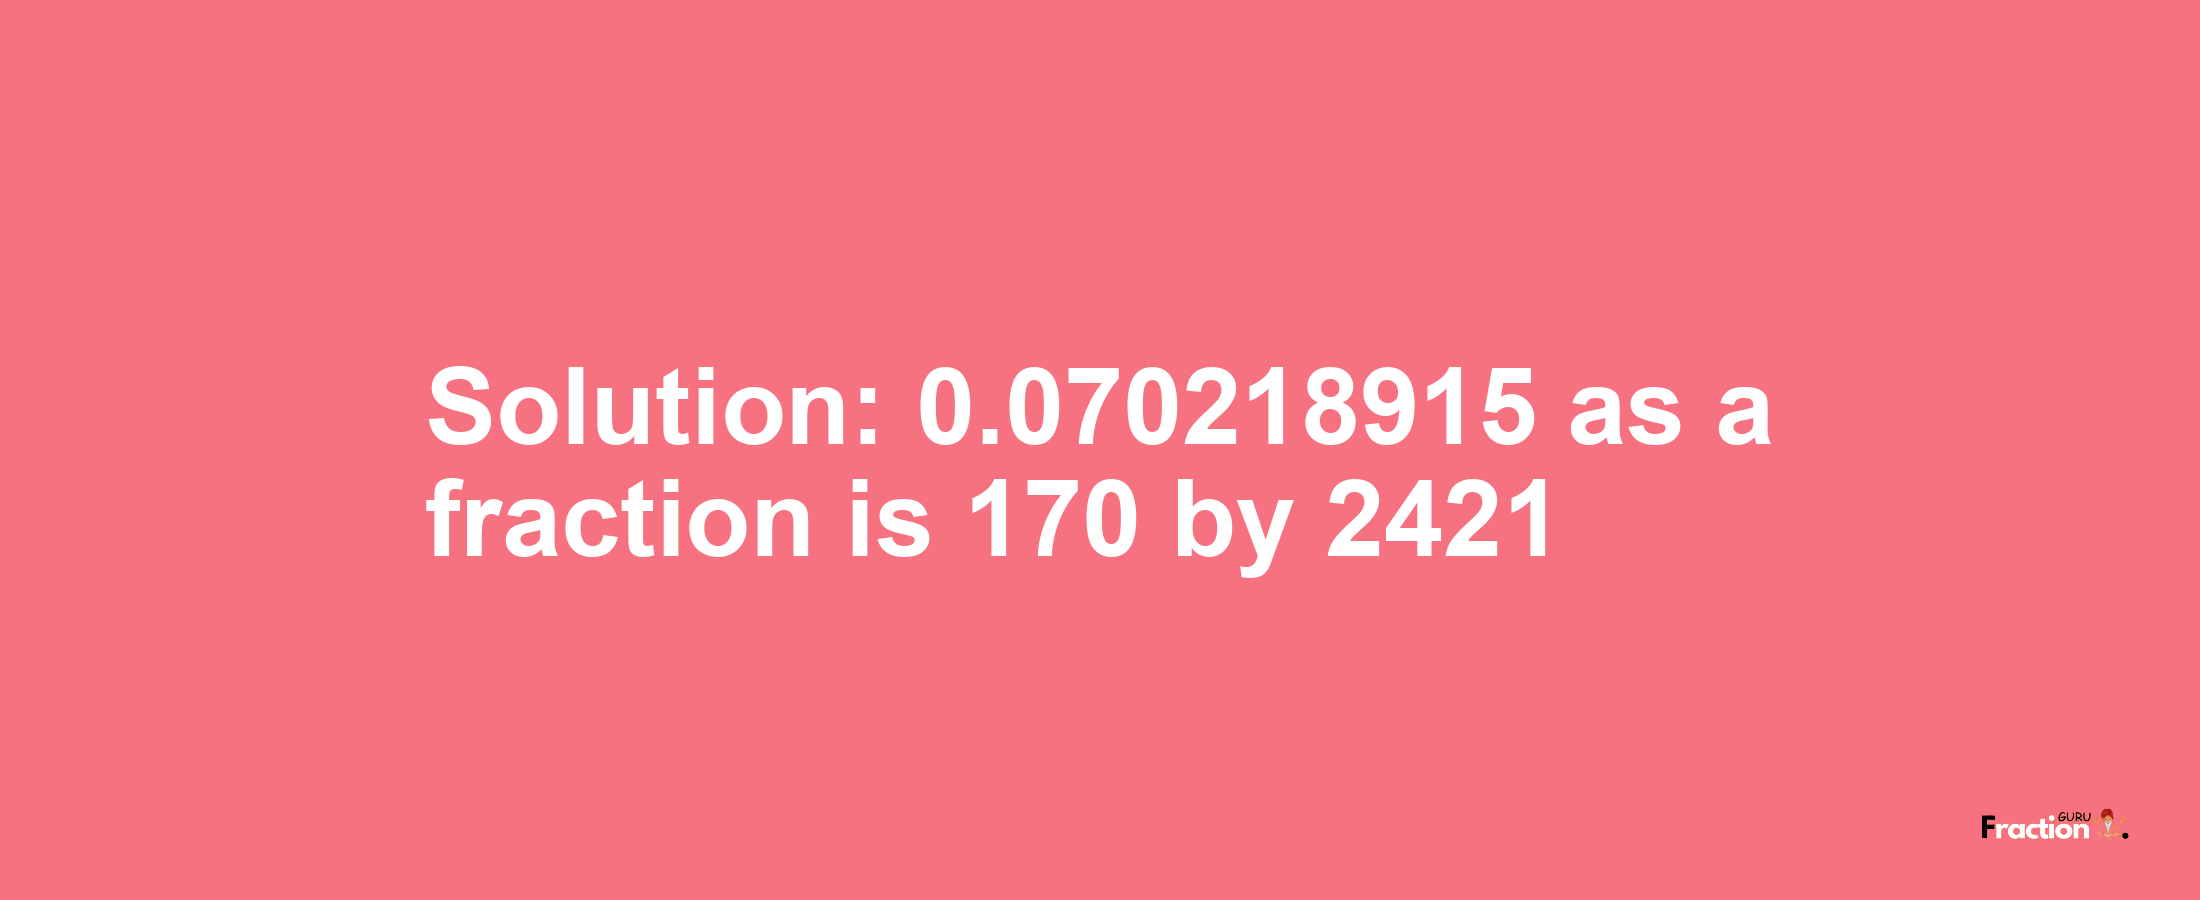 Solution:0.070218915 as a fraction is 170/2421